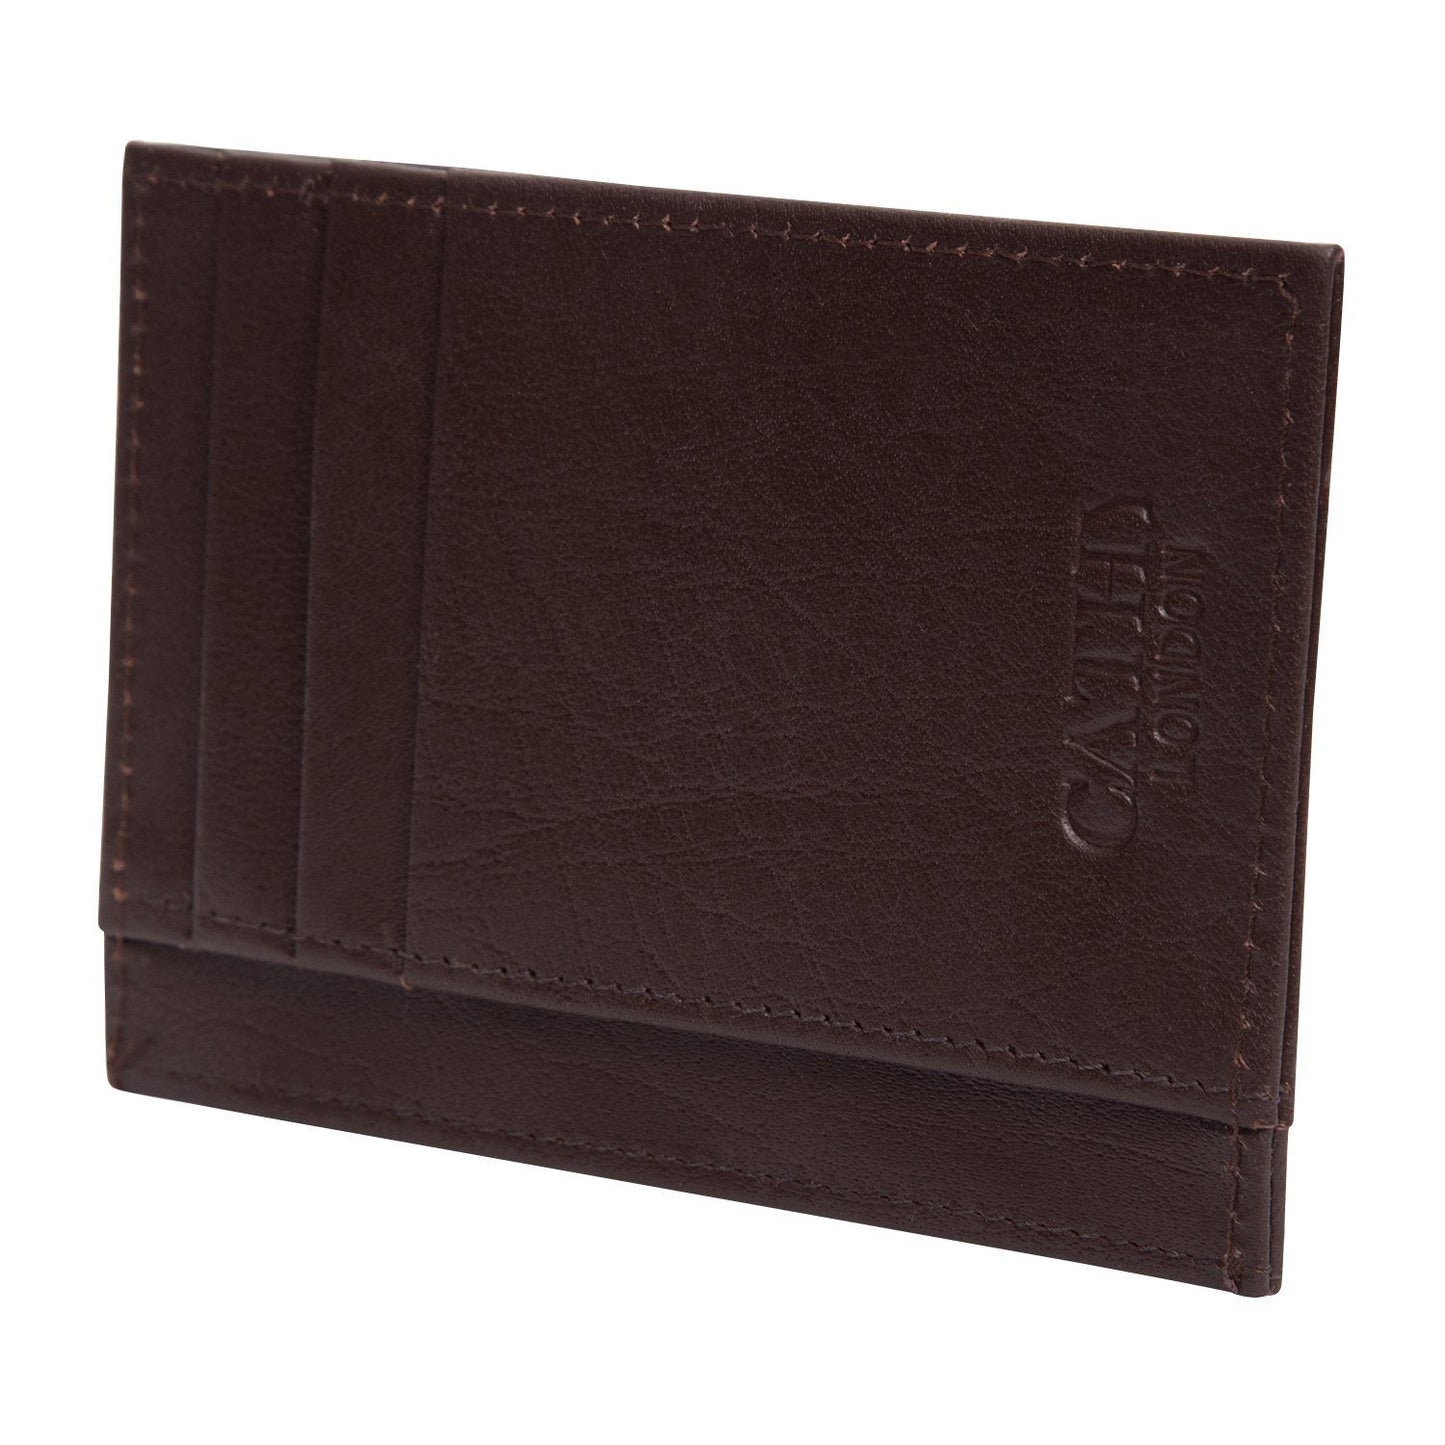 Brown Italian Leather Card Holder/Slim Wallet (6 Card Slots + 1 ID Slot + Cash Compartment) Cathy London 